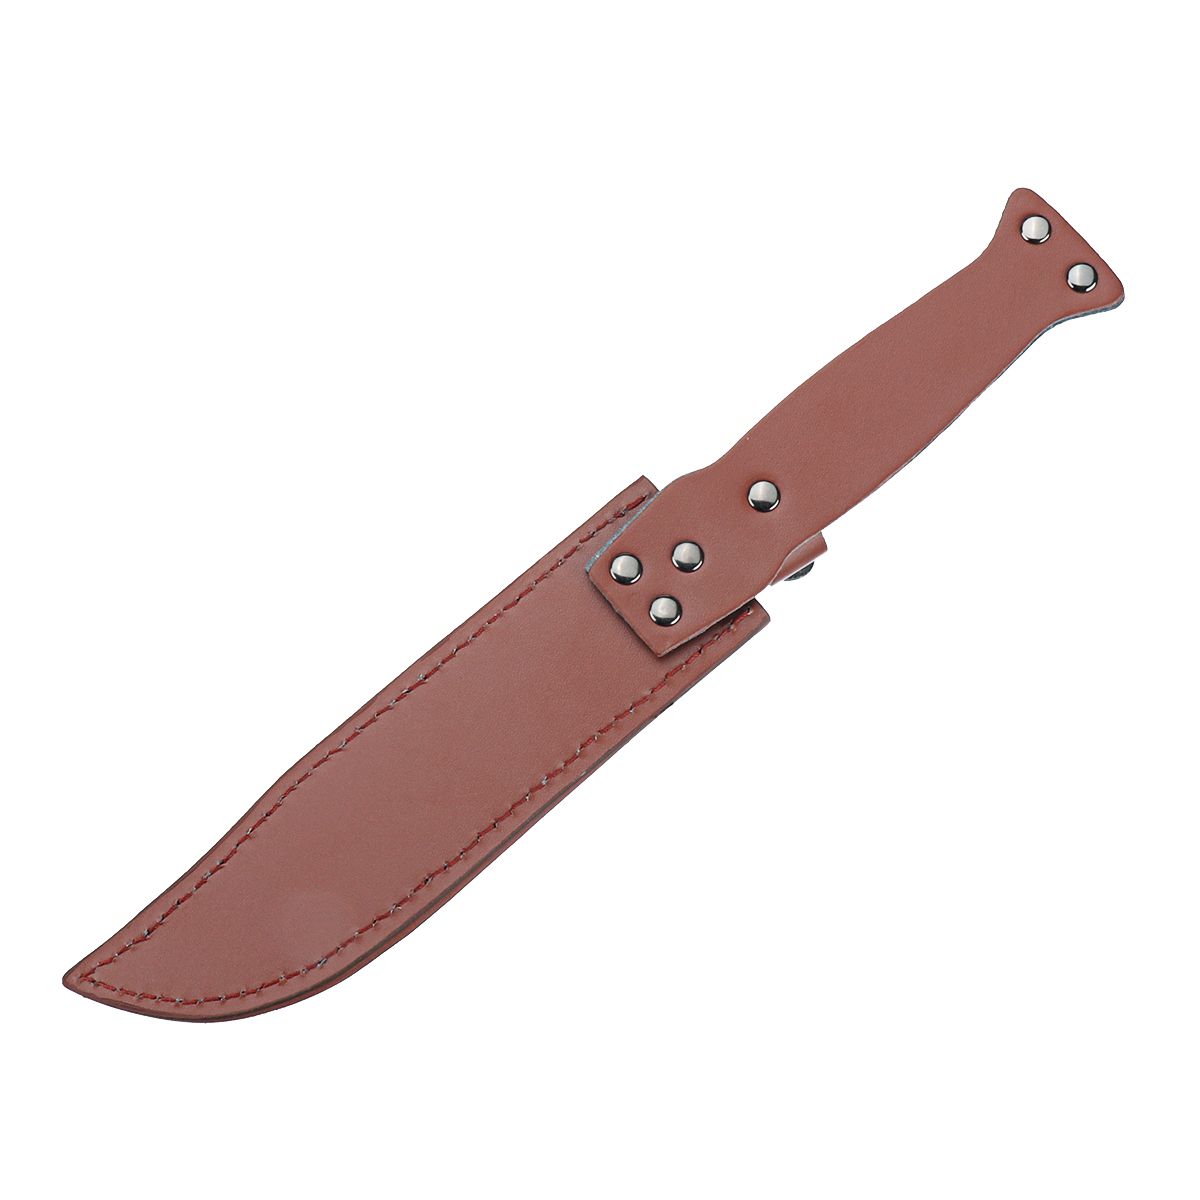 33cm-Leather-Sheath-Saber-Cutter-Holder-Cover-Protector-Cosplay-Costume-Outdoor-Leather-Craft-Tool-1626939